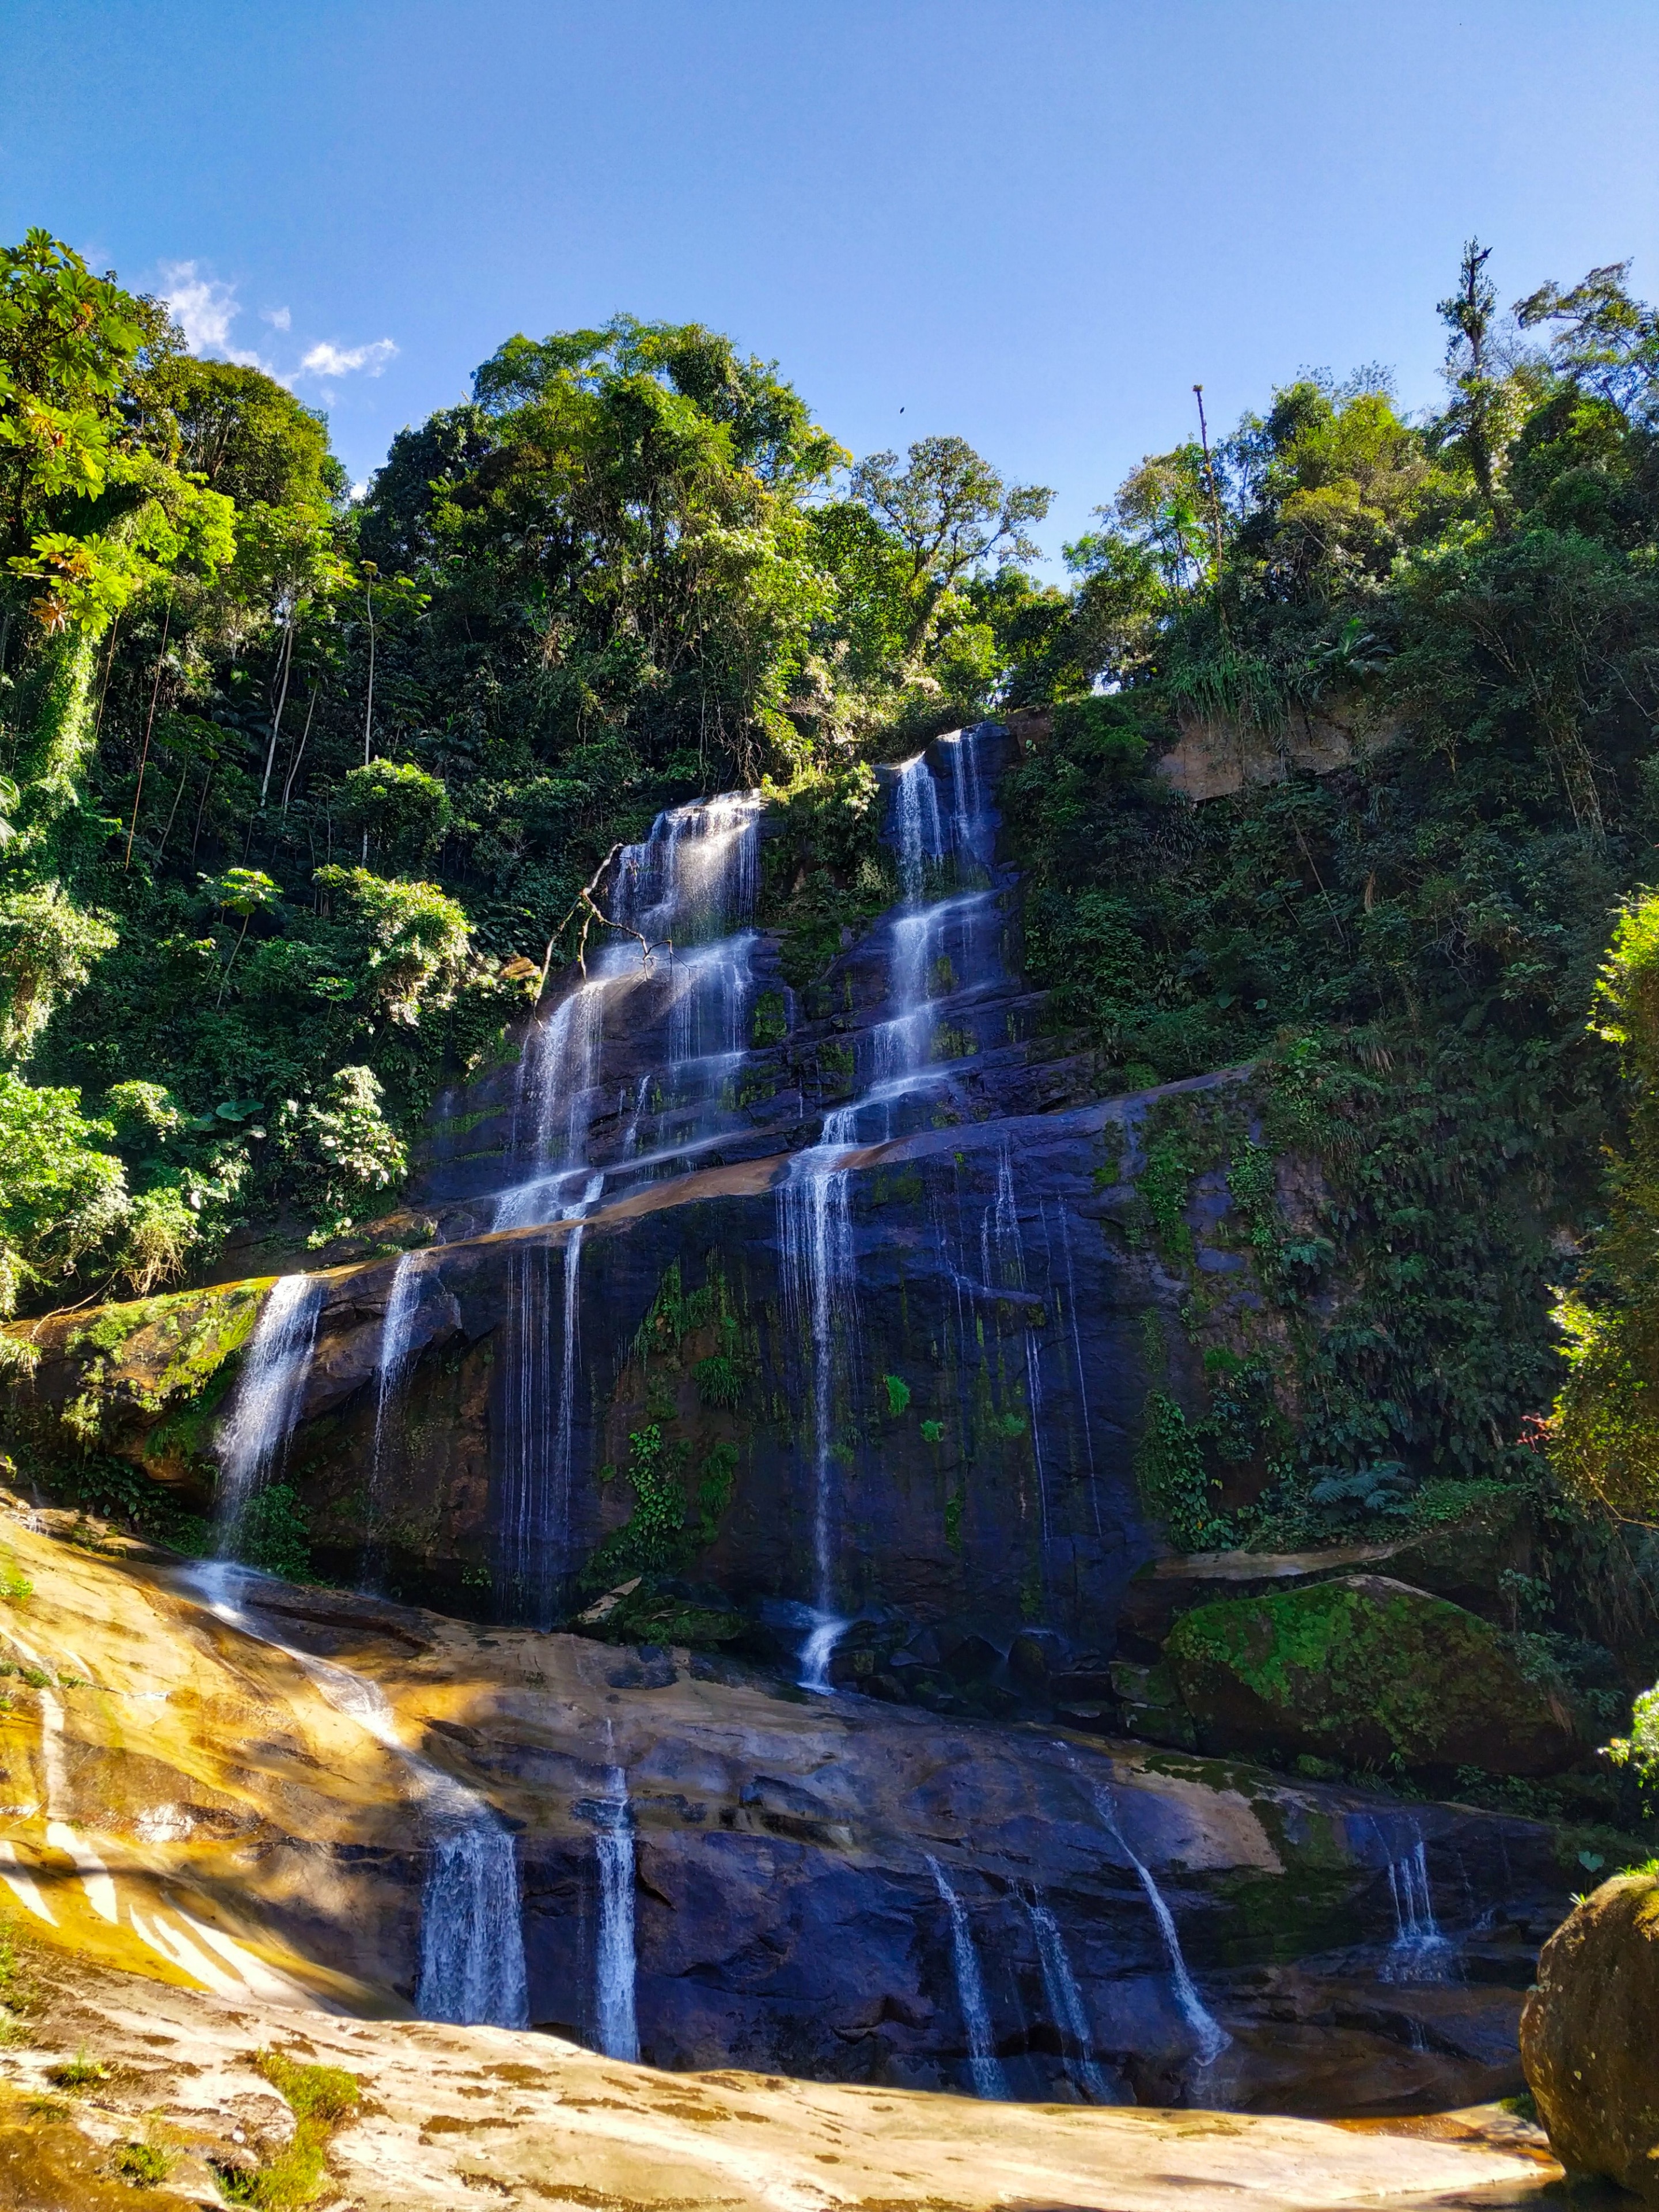 This amazing place is the "Cachoeira da Jornada" in Regua, a Forest reserve in Cachoeiras de Macacu/RJ, a beautiful place to visit with your family!

#nature #waterfall #brasil #travel #florest #tree 